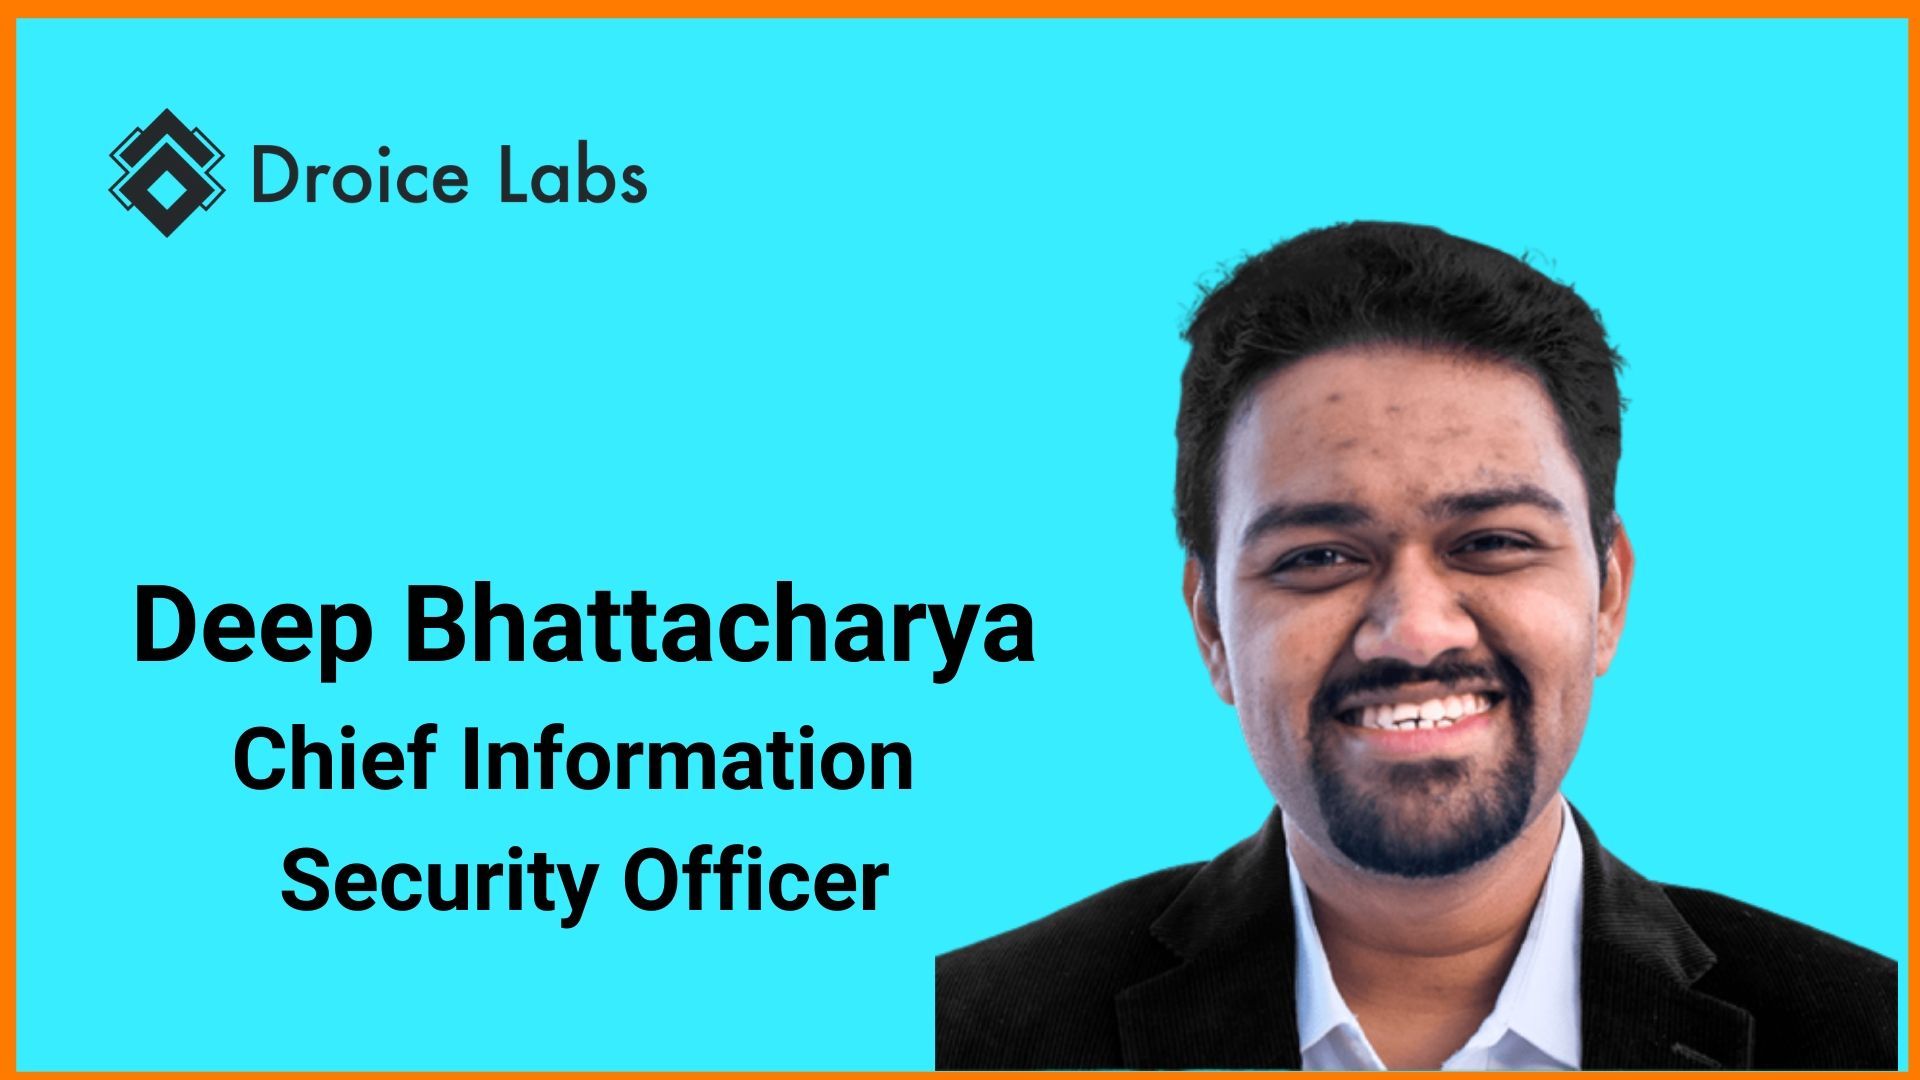 Co-founder and Chief Information Security Officer